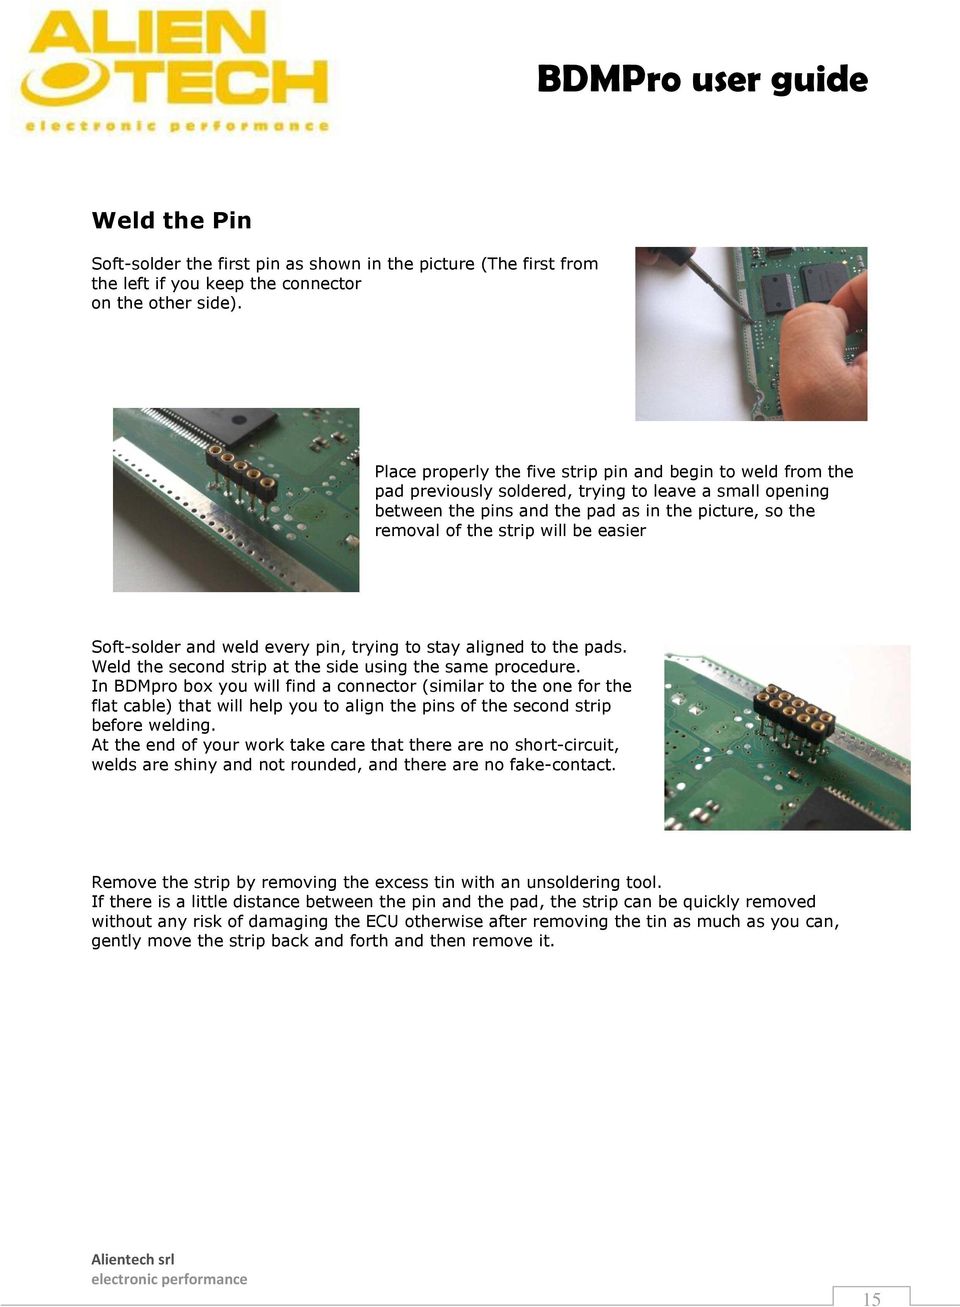 be easier Soft-solder and weld every pin, trying to stay aligned to the pads. Weld the second strip at the side using the same procedure.